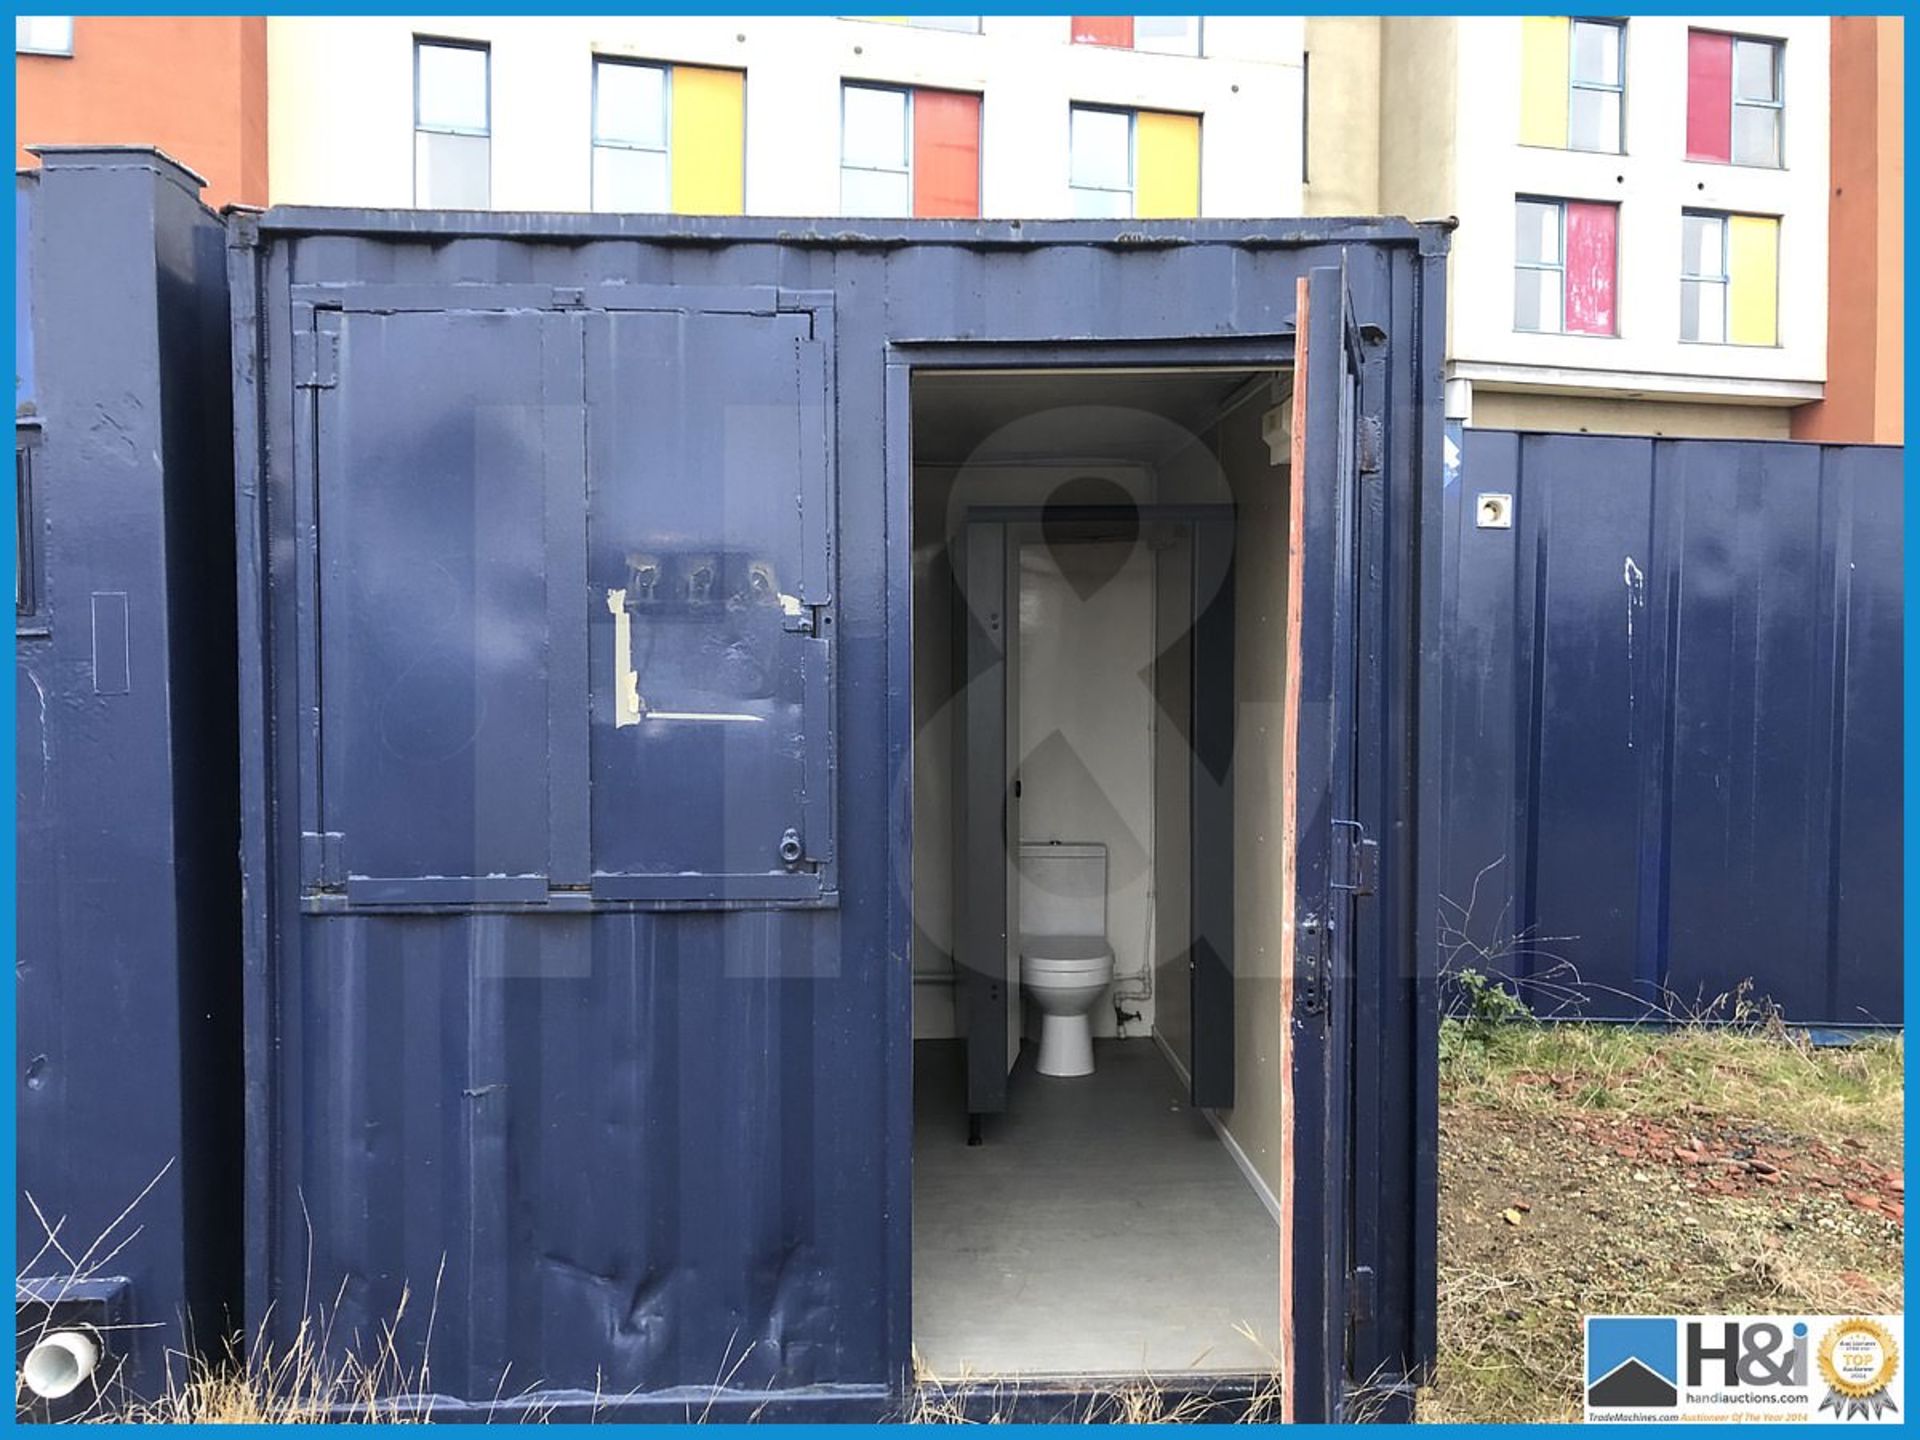 Appx 11ft x 9ft gents site toilet block in excellent condition. Access for a hiab lorry is good. The